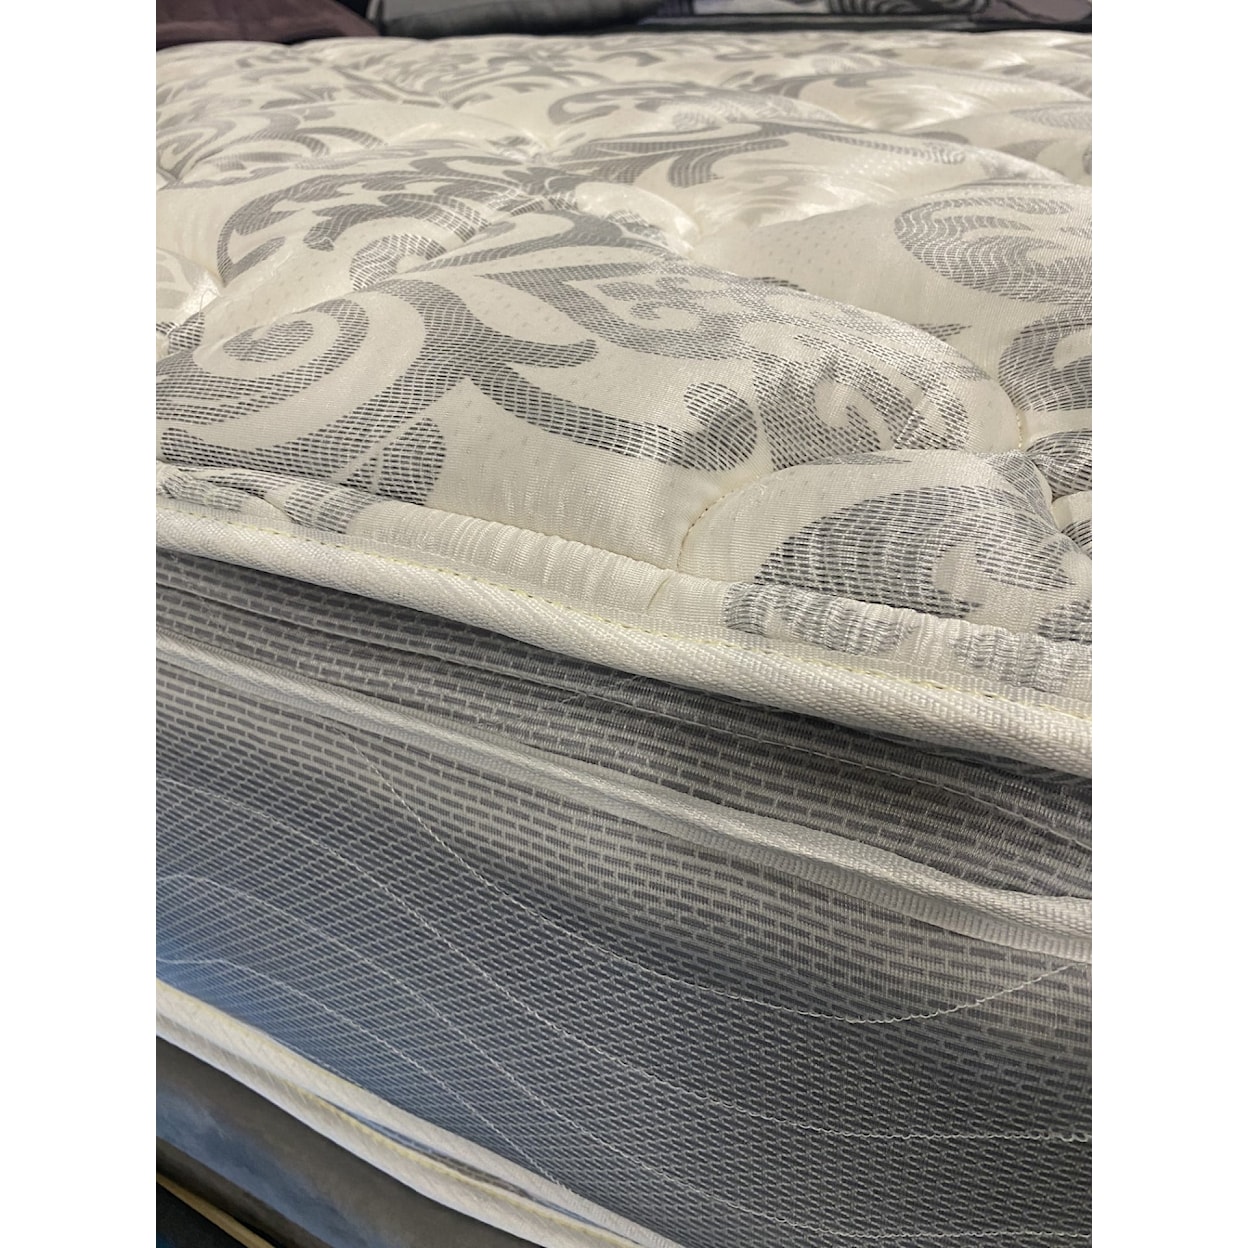 Chicago Mattress Company Silver Promo Quilt TWIN SILVER 12" PROMO | QUILT 2 SIDED PILLOW